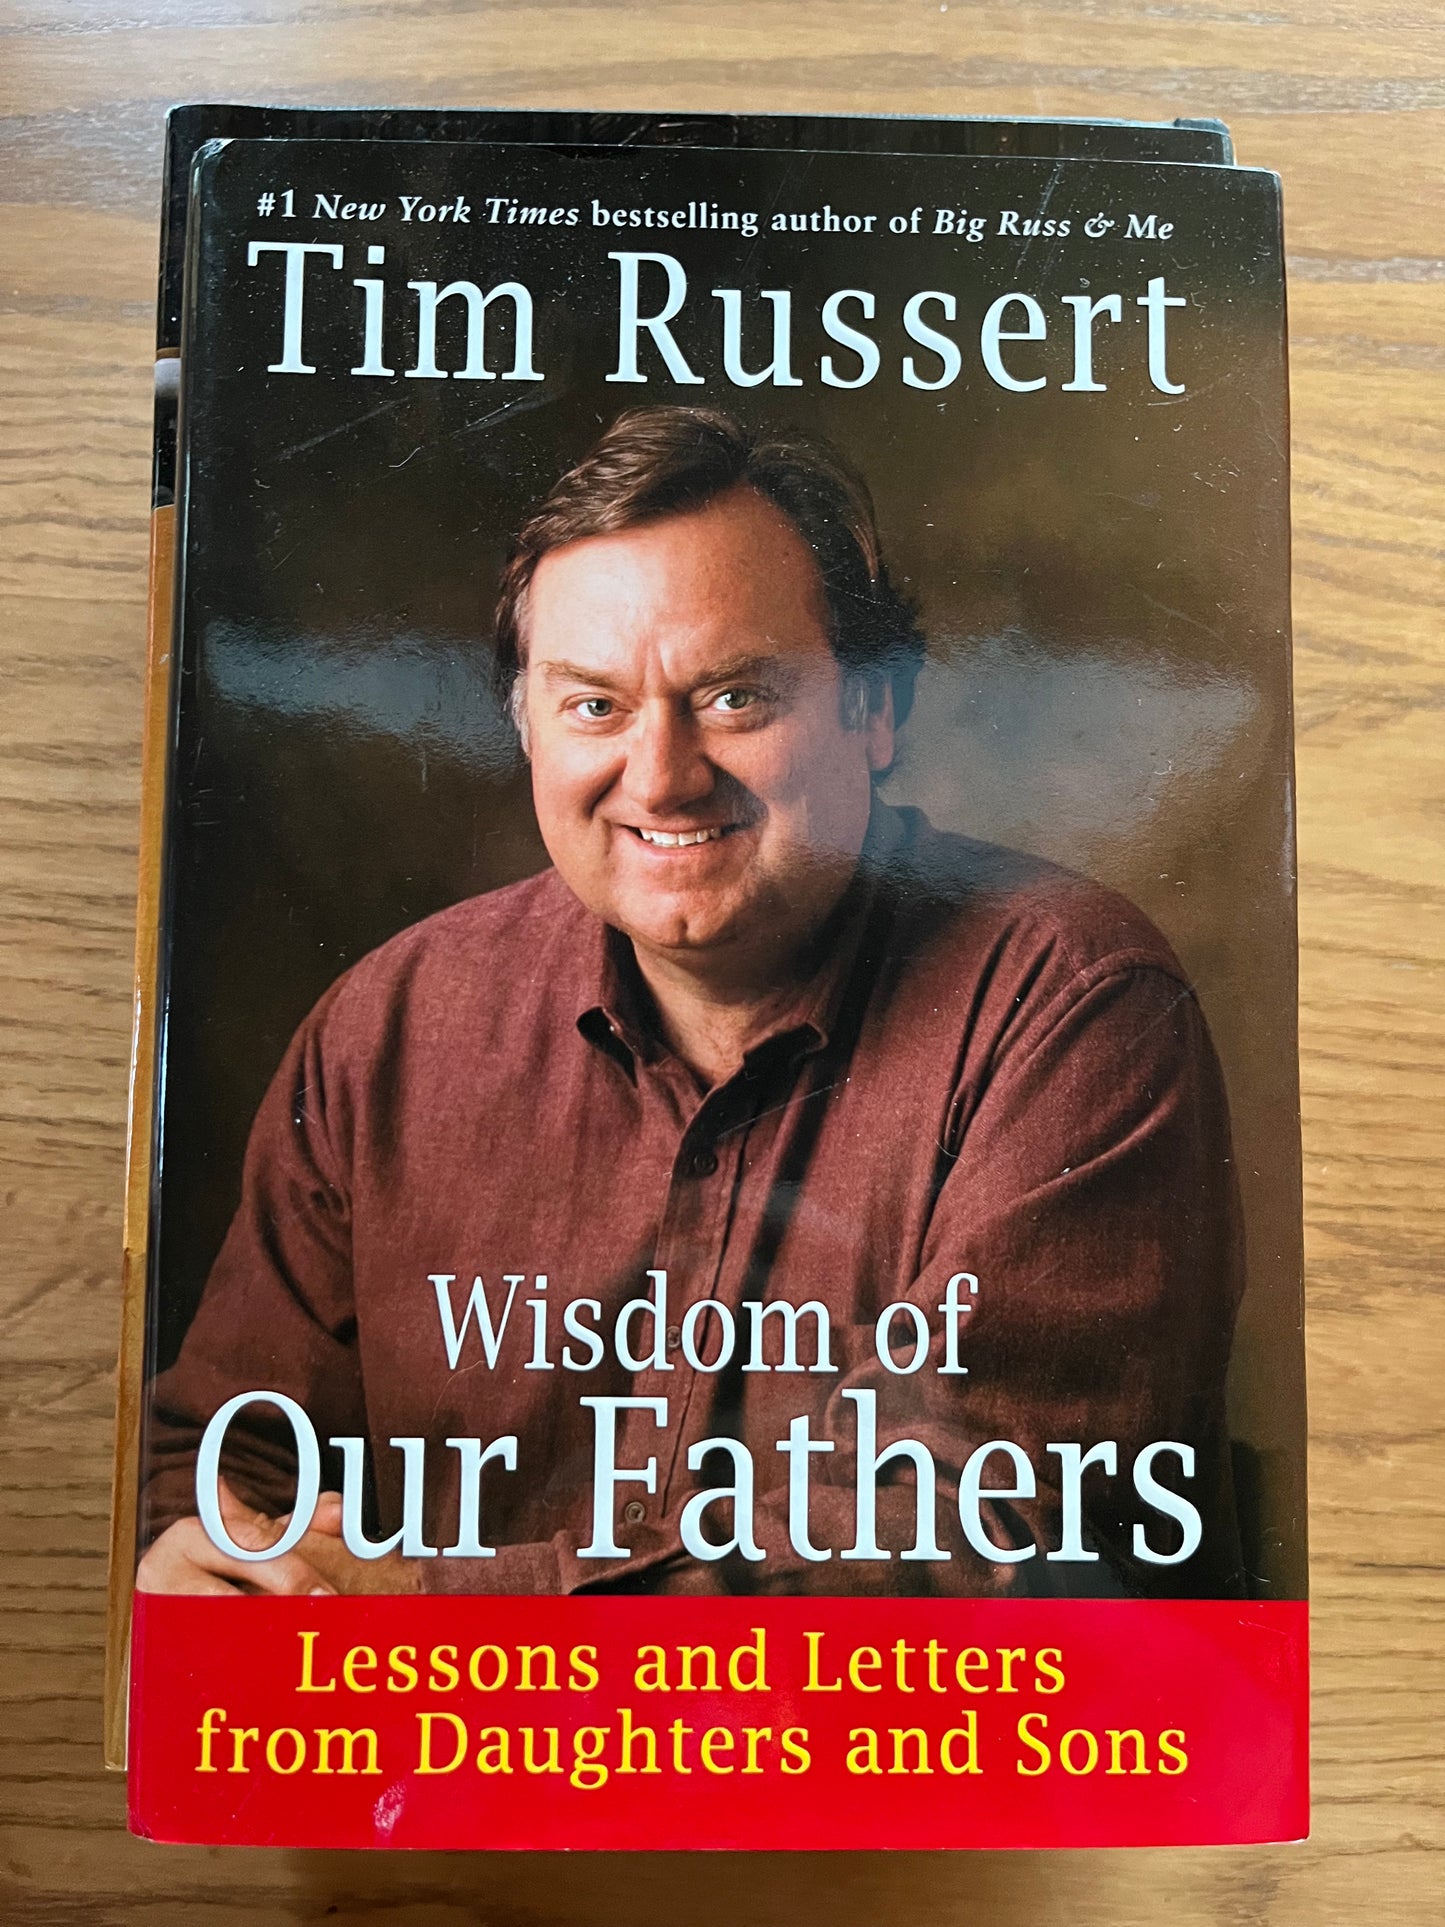 TIM RUSSERT, Wisdom of Our Fathers (autographed book)